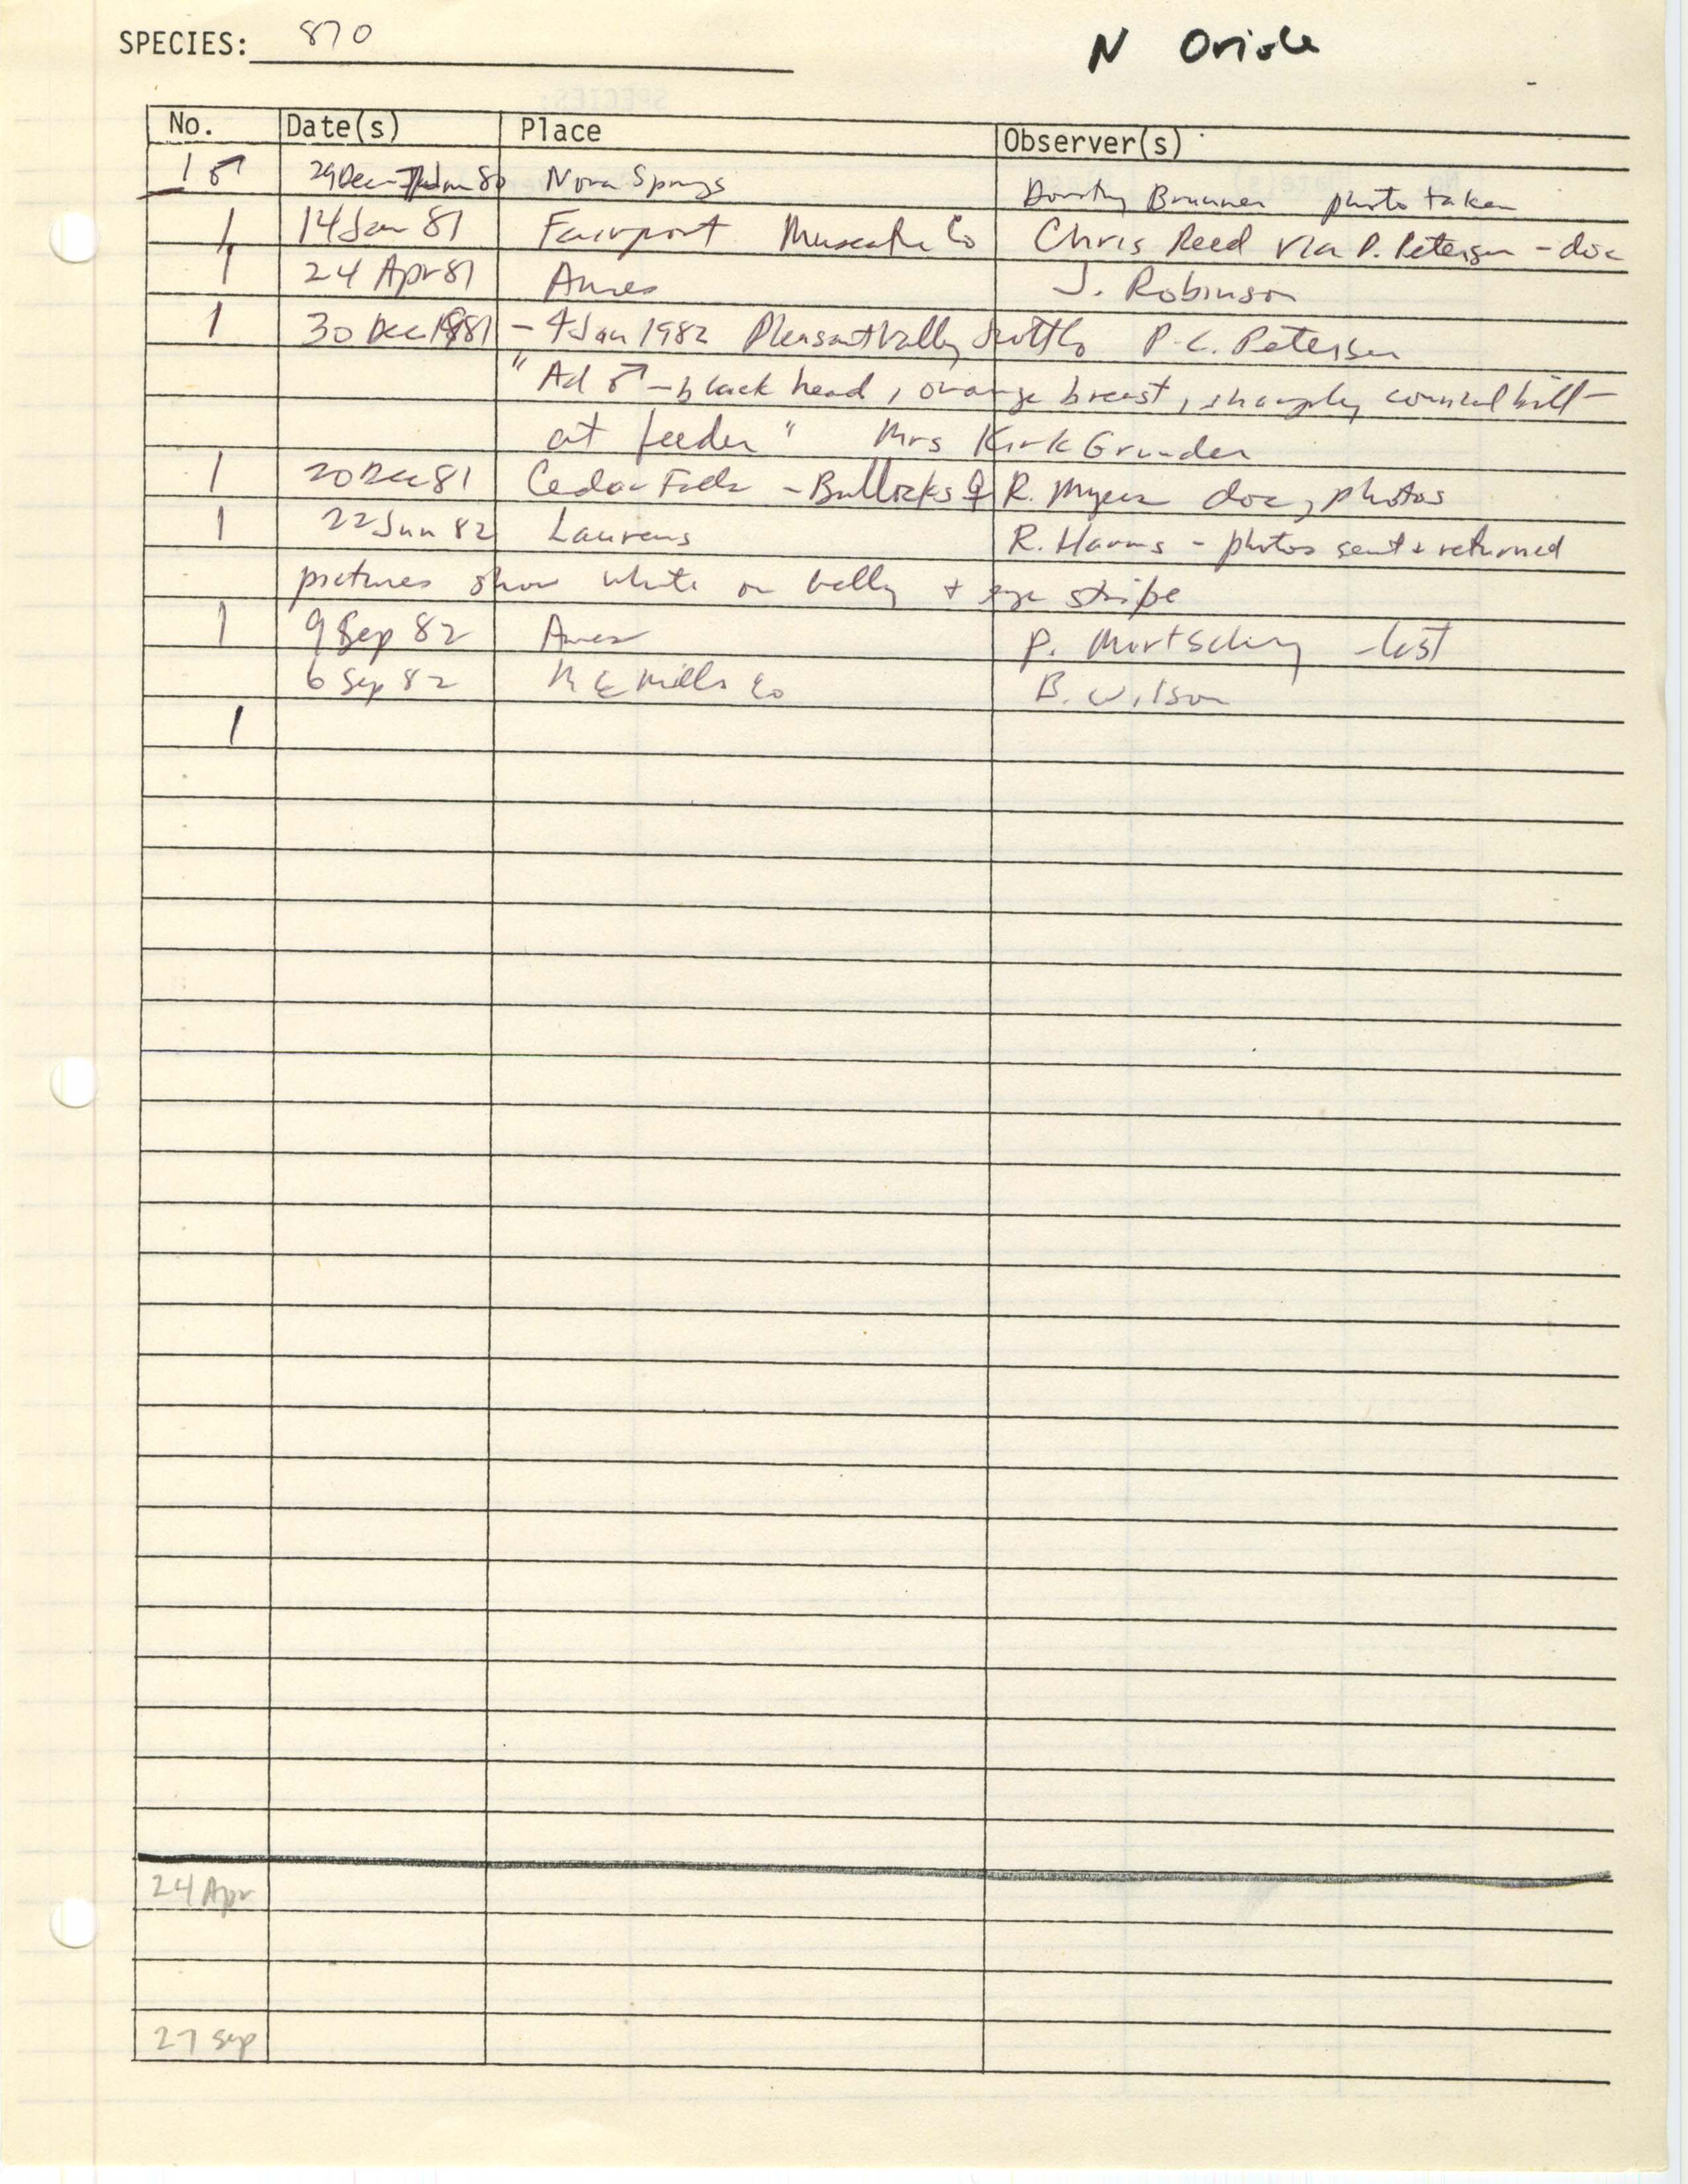 Iowa Ornithologists' Union, field report compiled data, Baltimore Oriole (Northern Oriole), 1979-1982